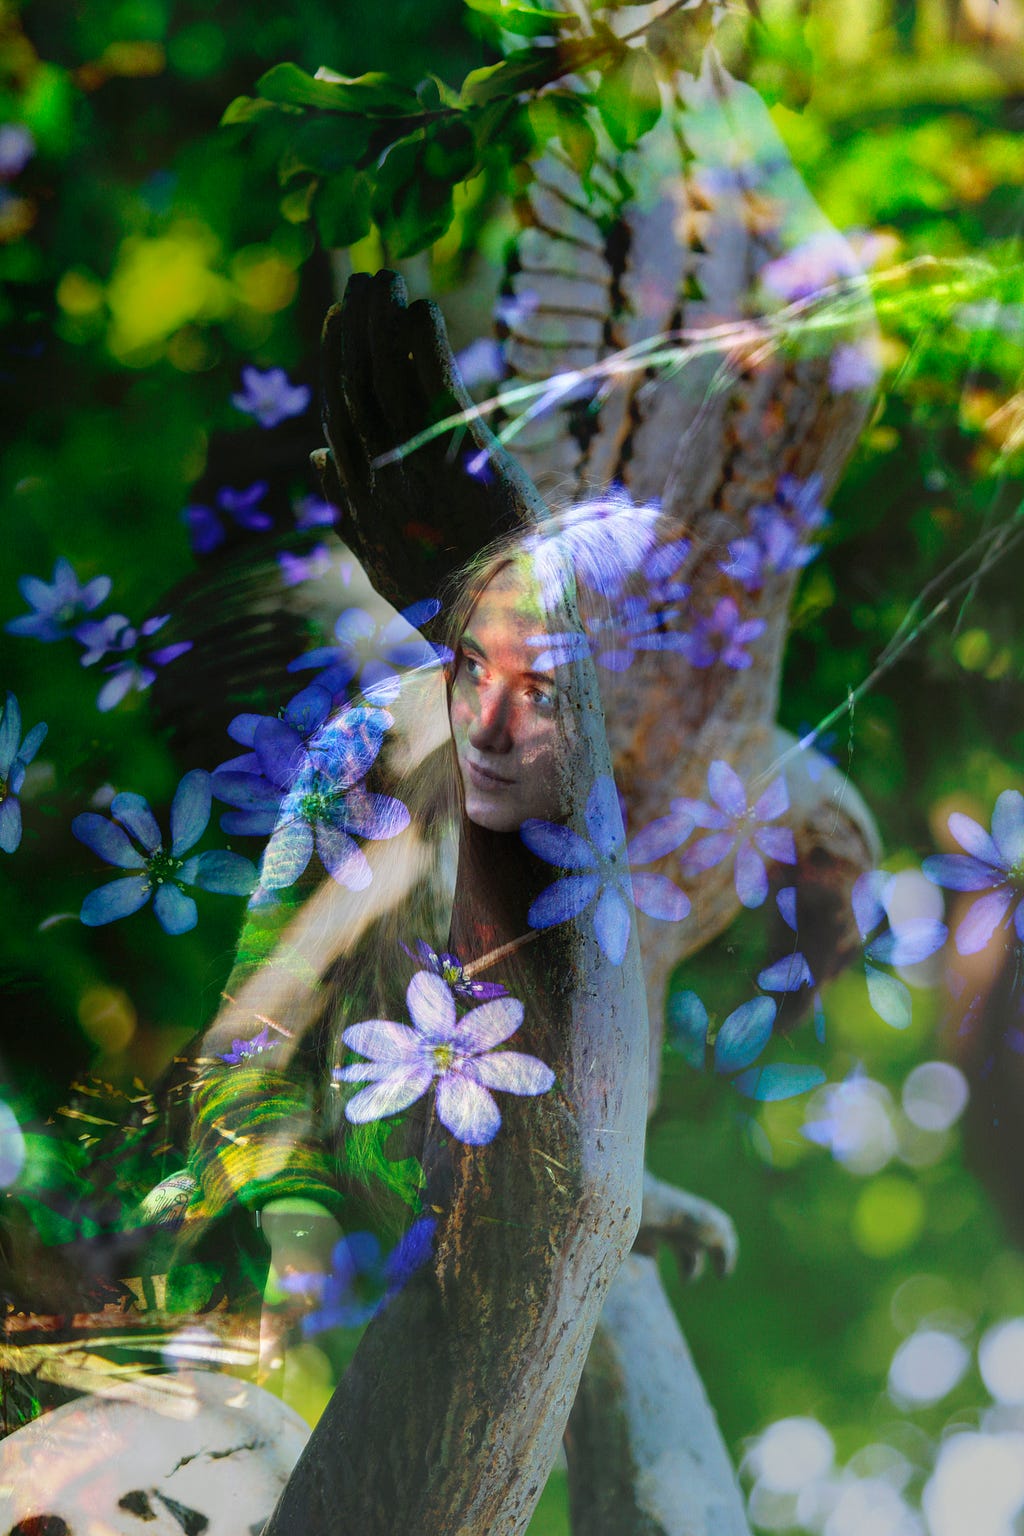 Digital artwork of a woman in the forest